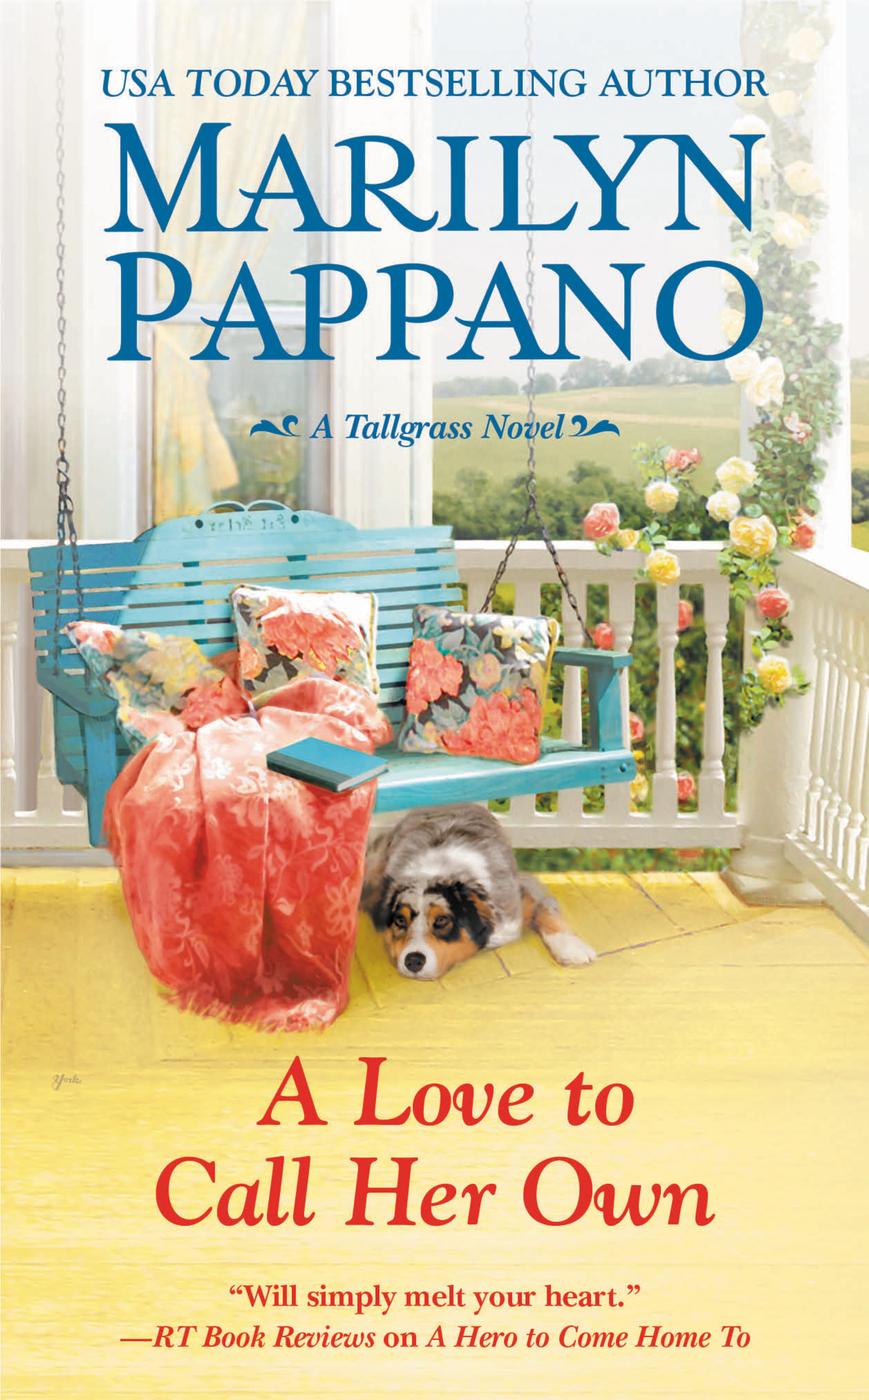 A Love to Call Her Own (2014) by Marilyn Pappano